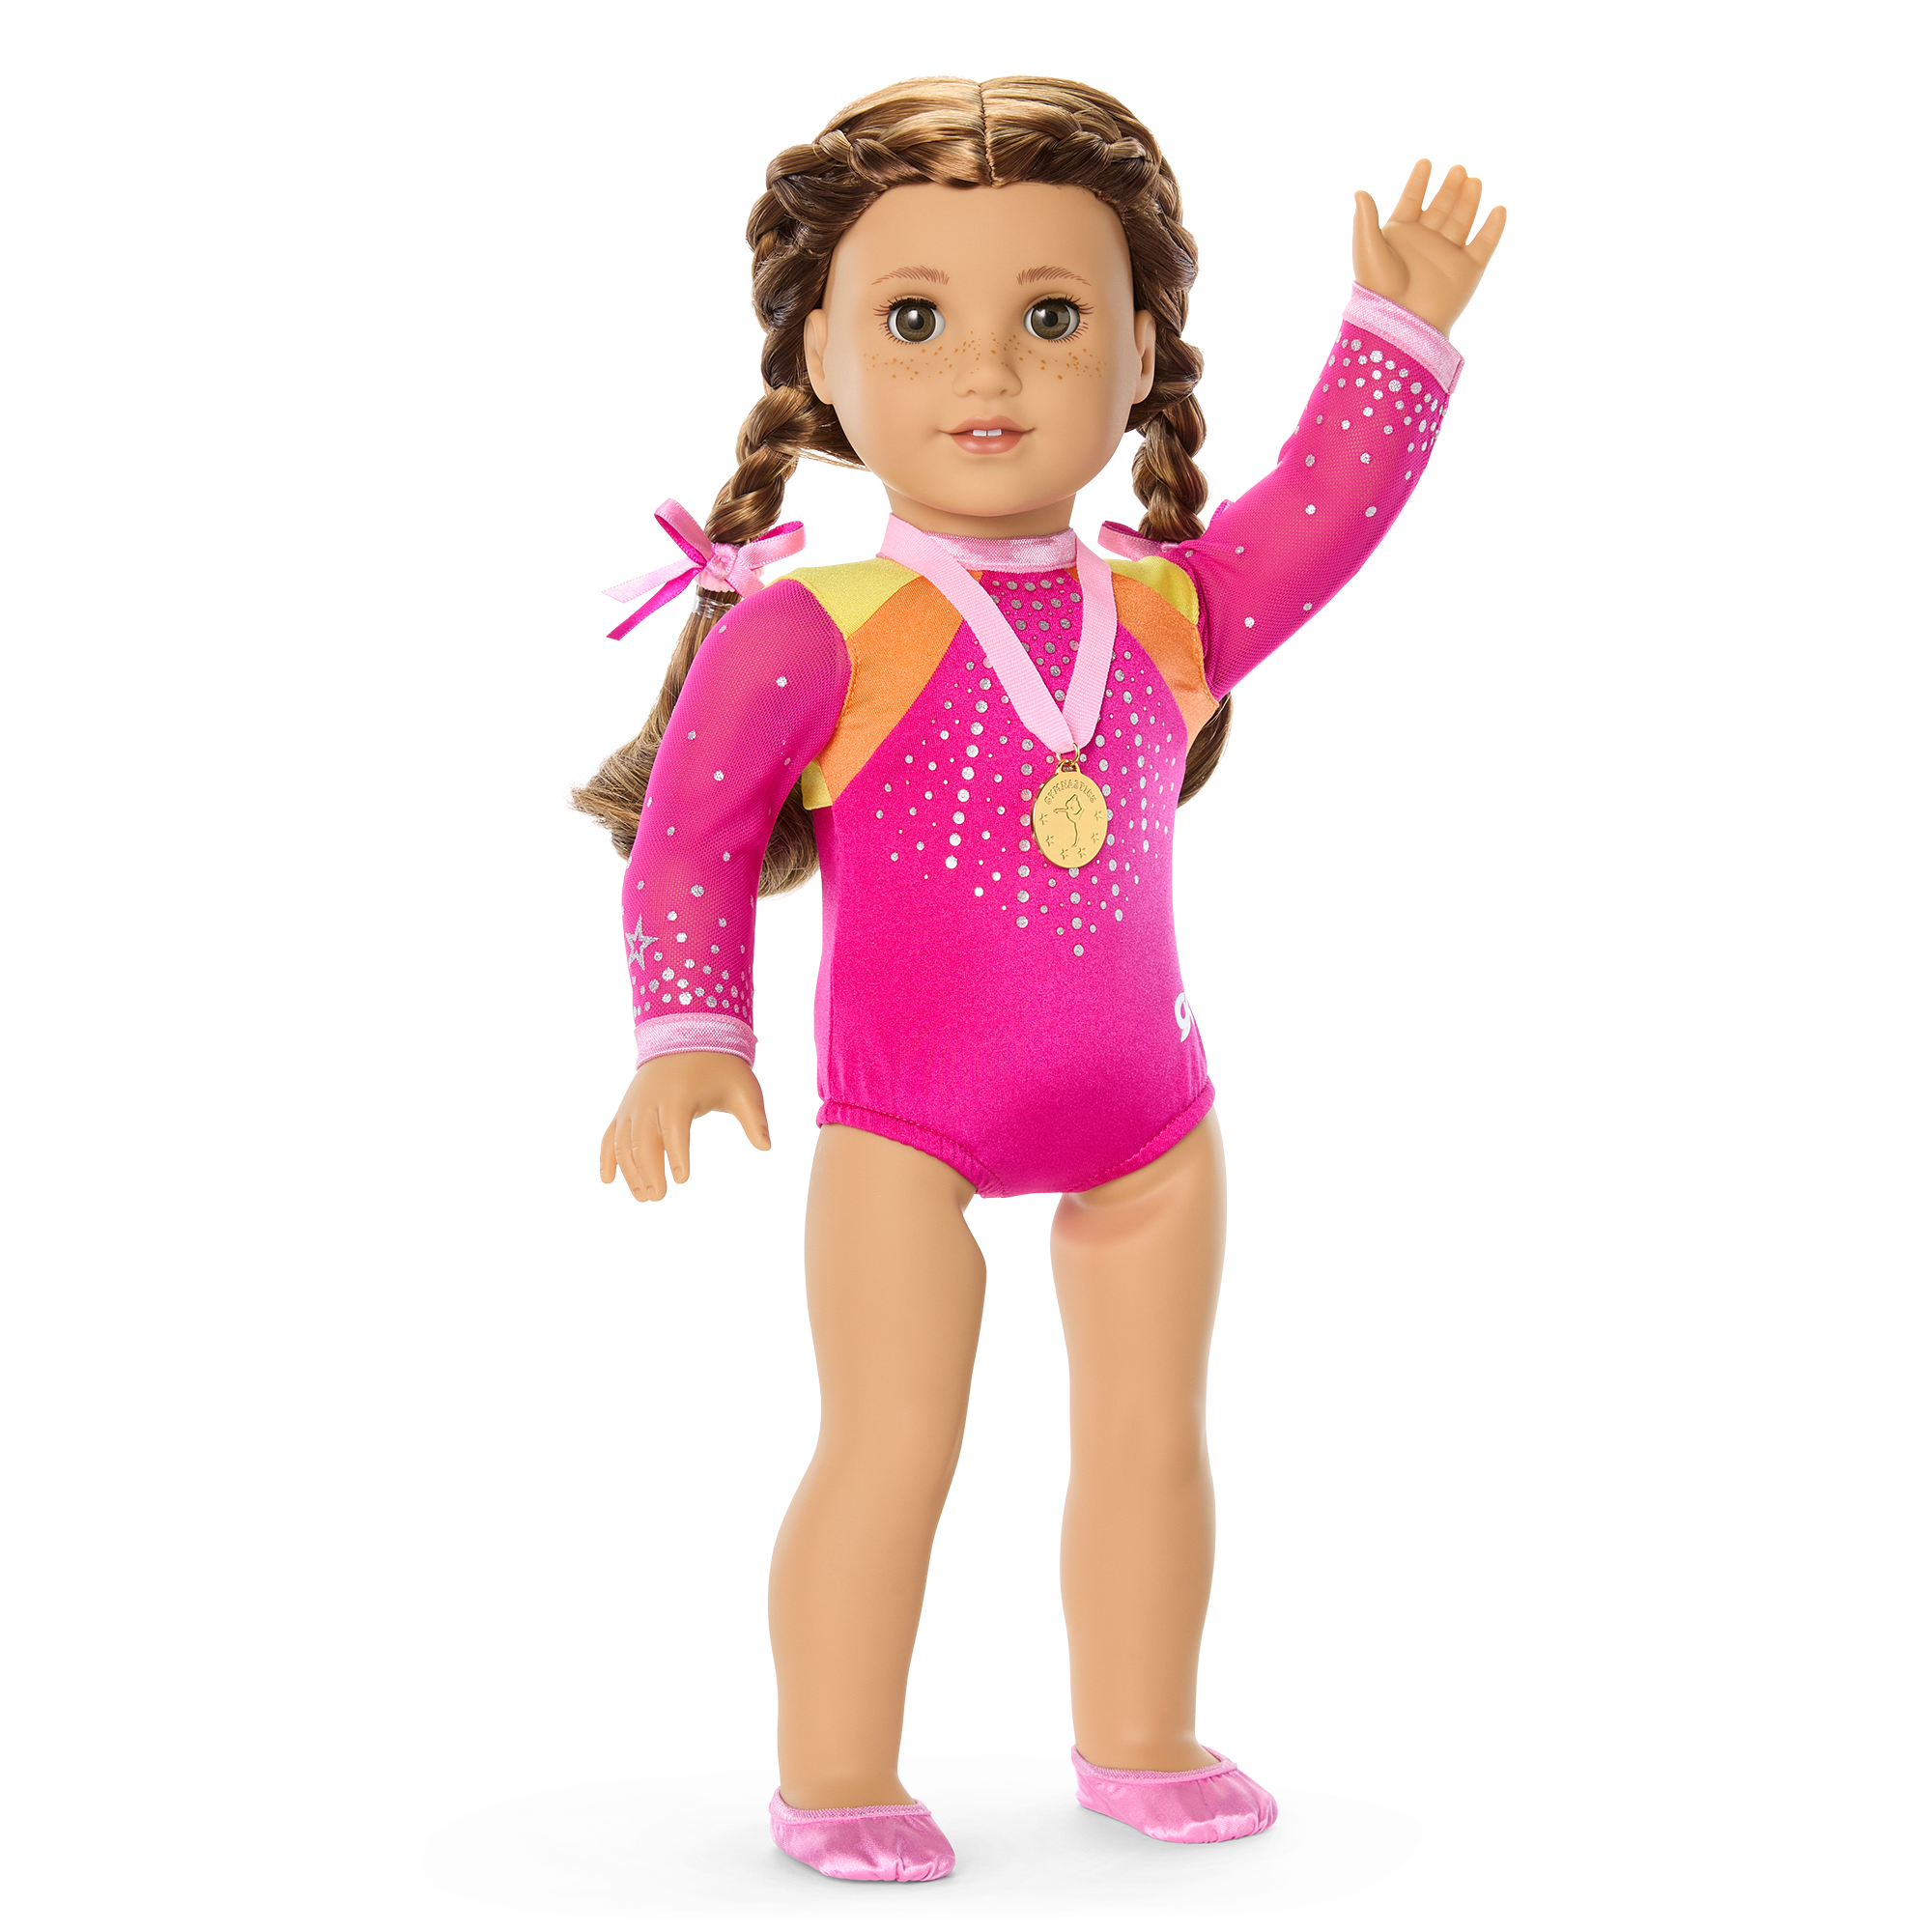 My Life as Accessories Play Set Yoga 18 Inch Dolls Playset American Girl  Size for sale online